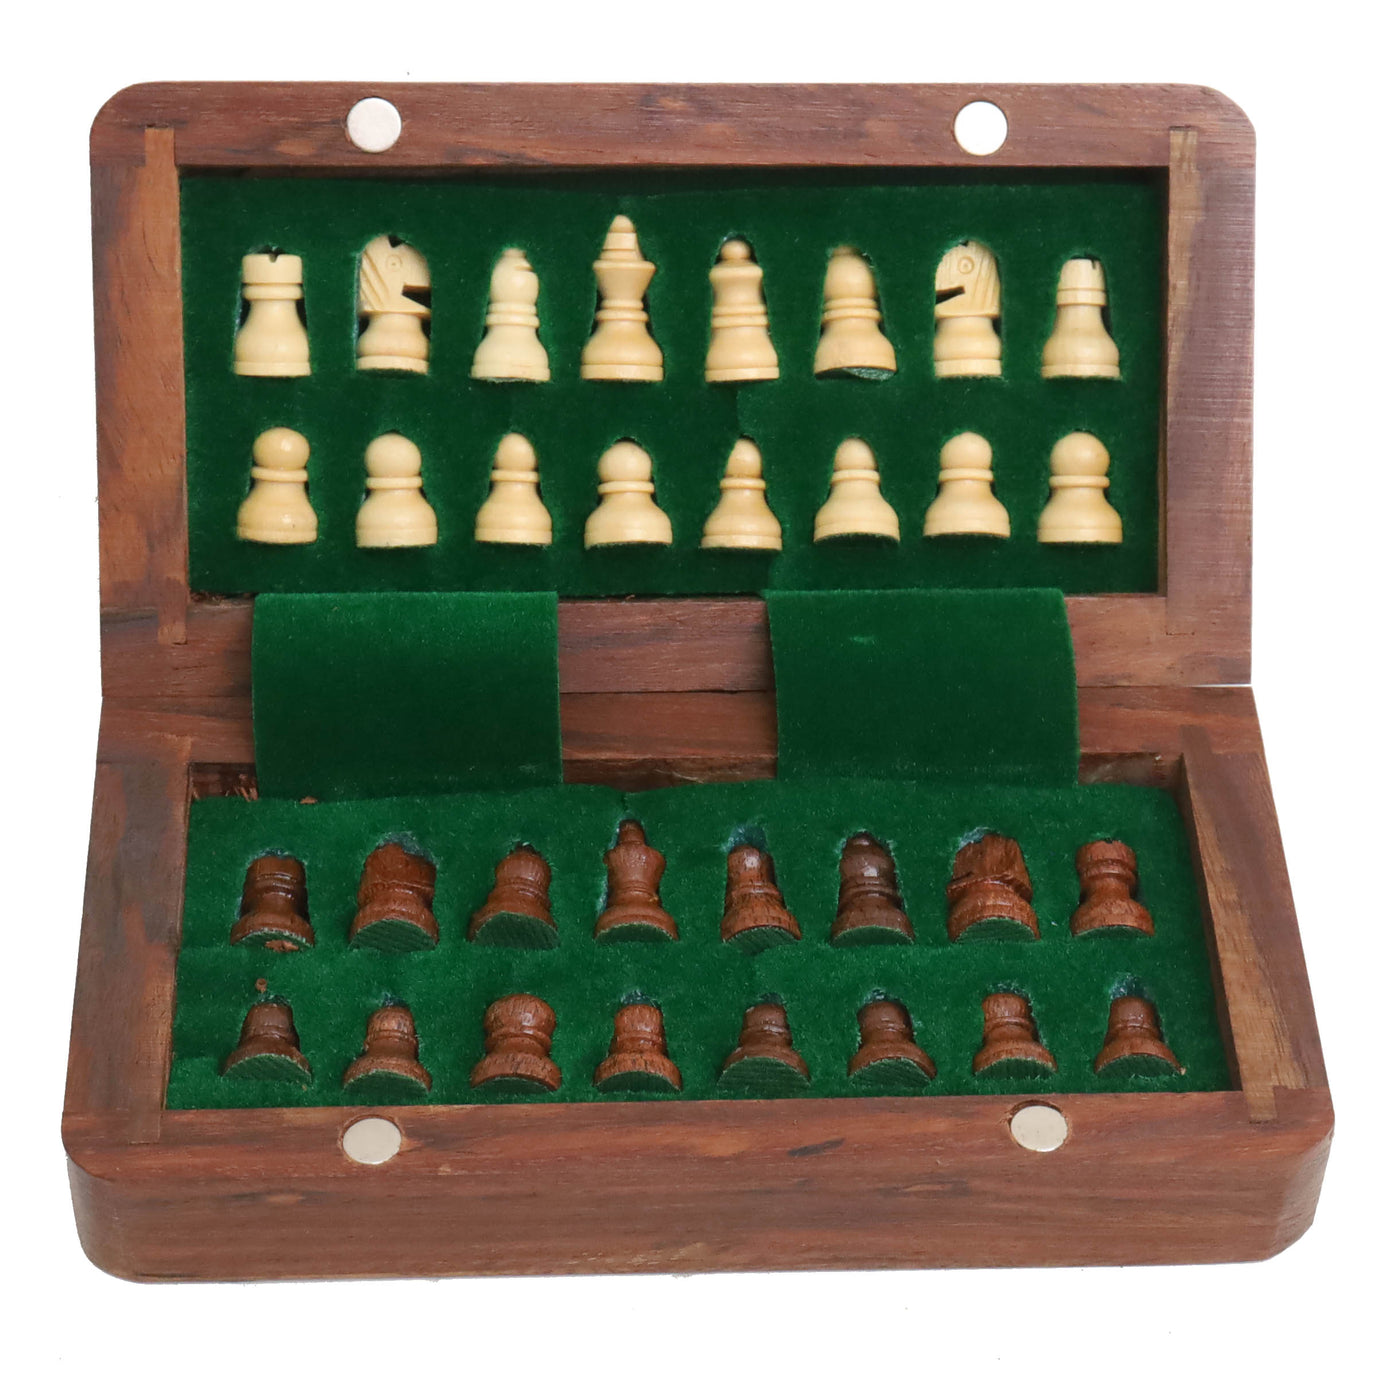 Golden Rosewood Wooden Inlaid Magnetic Chess set 5" with Folding Board